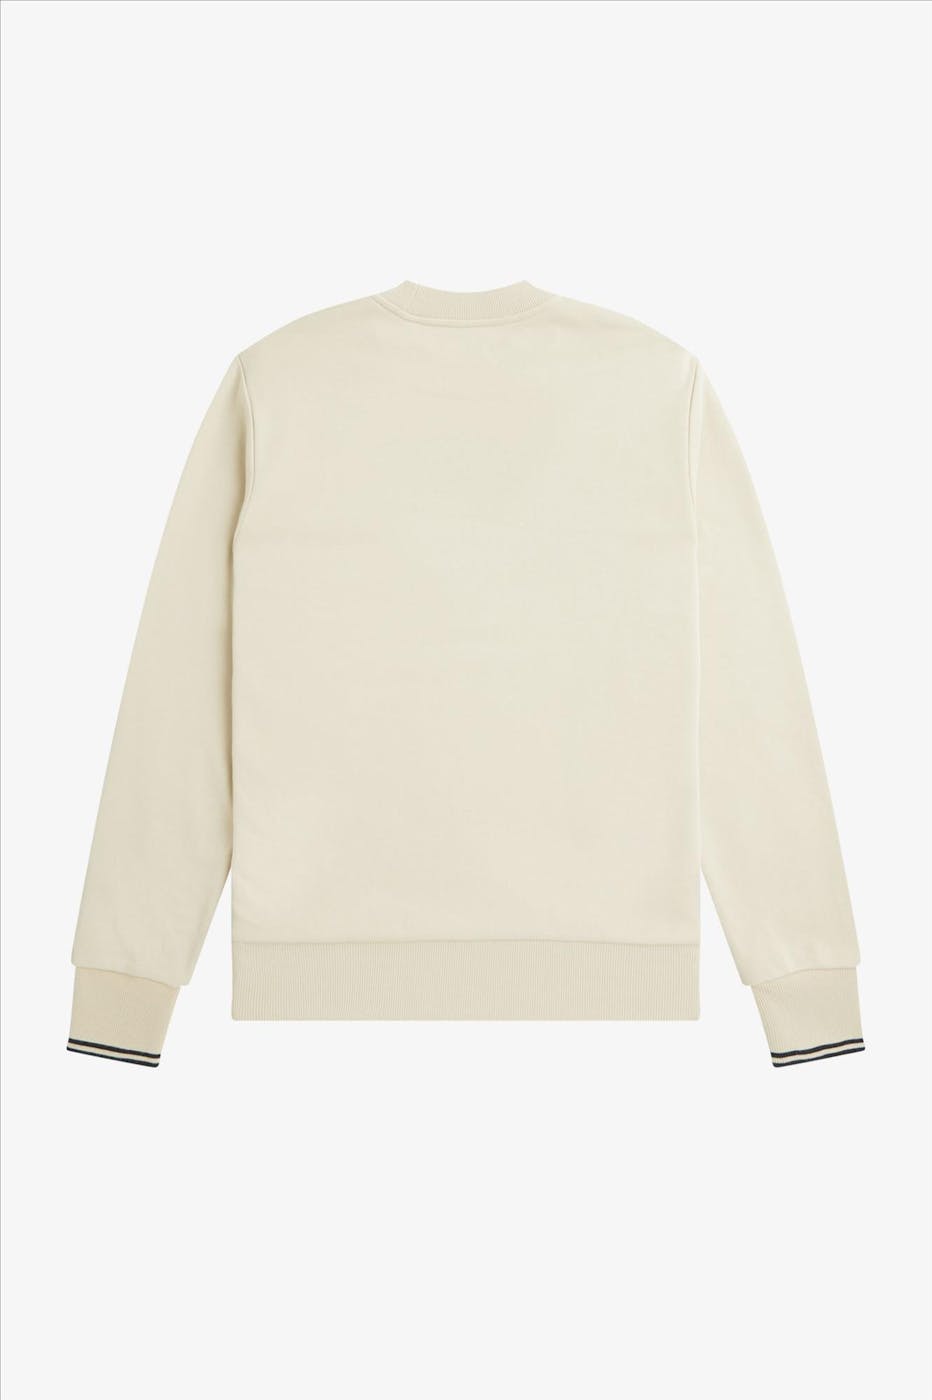 Fred Perry - Beige Crew Neck sweater